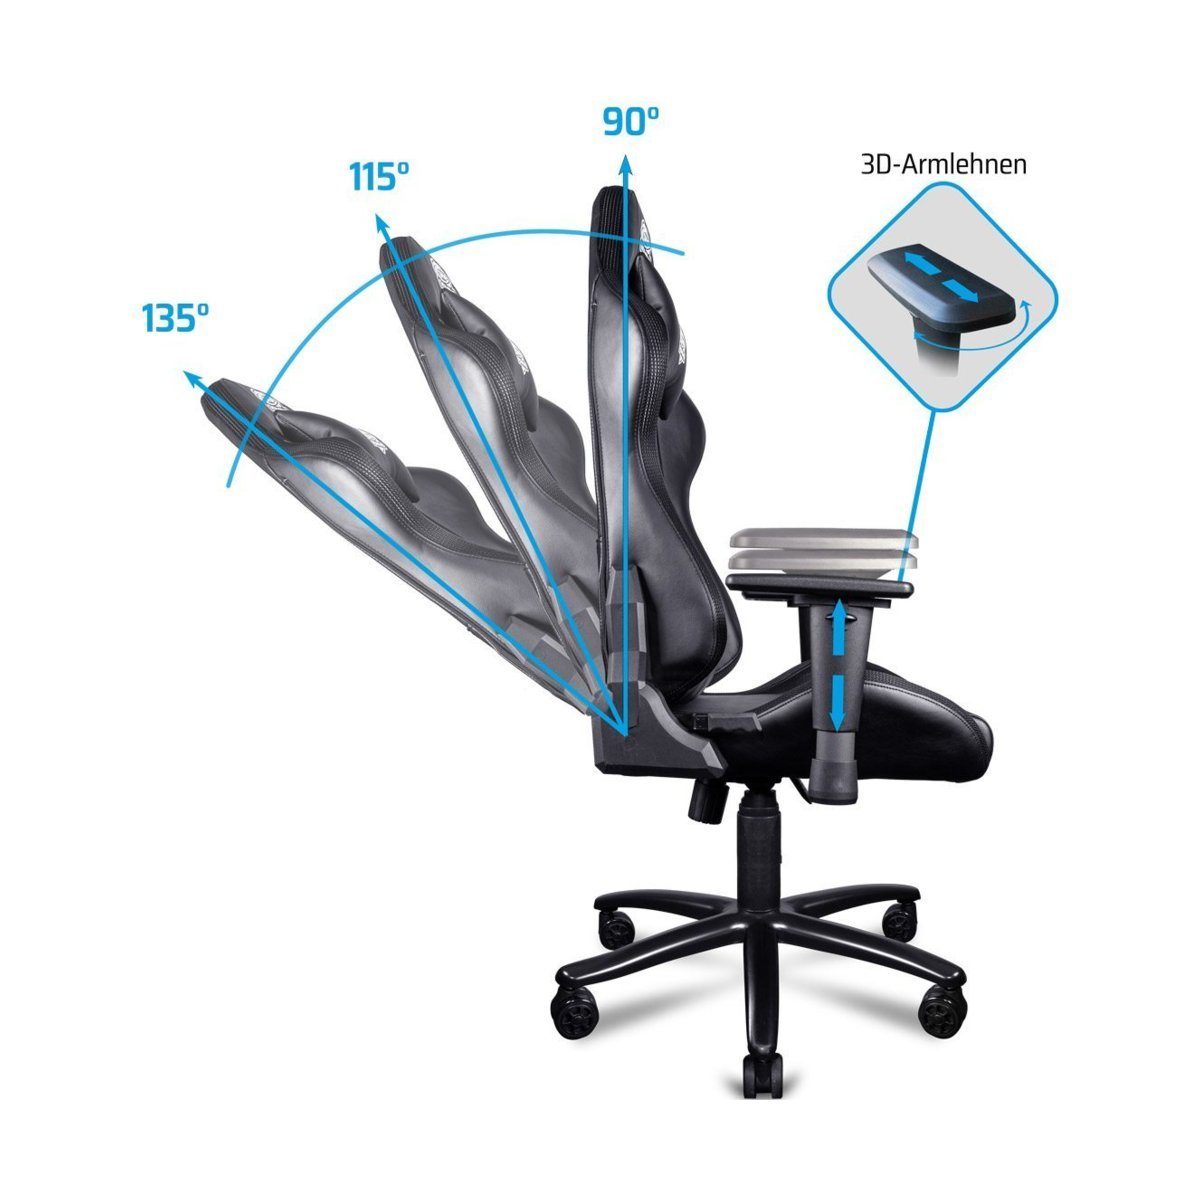 GAMING ONE Chair Gaming ONE RGB Chair Pro GAMING Stuhl Gaming